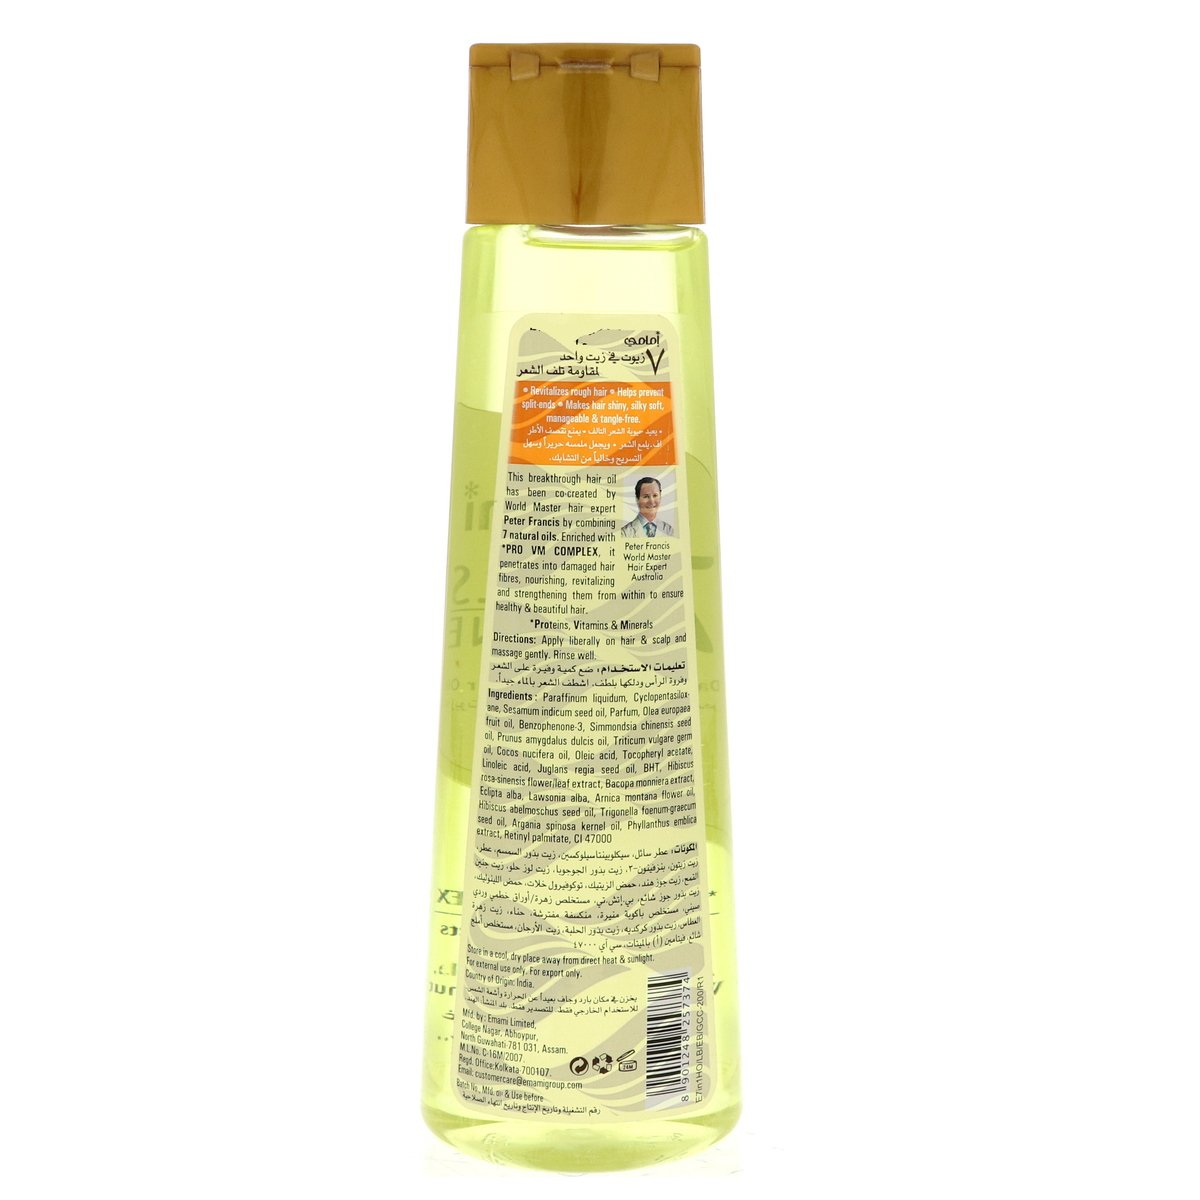 Emami 7 Oils In One Damage Control Hair Oil 200 ml